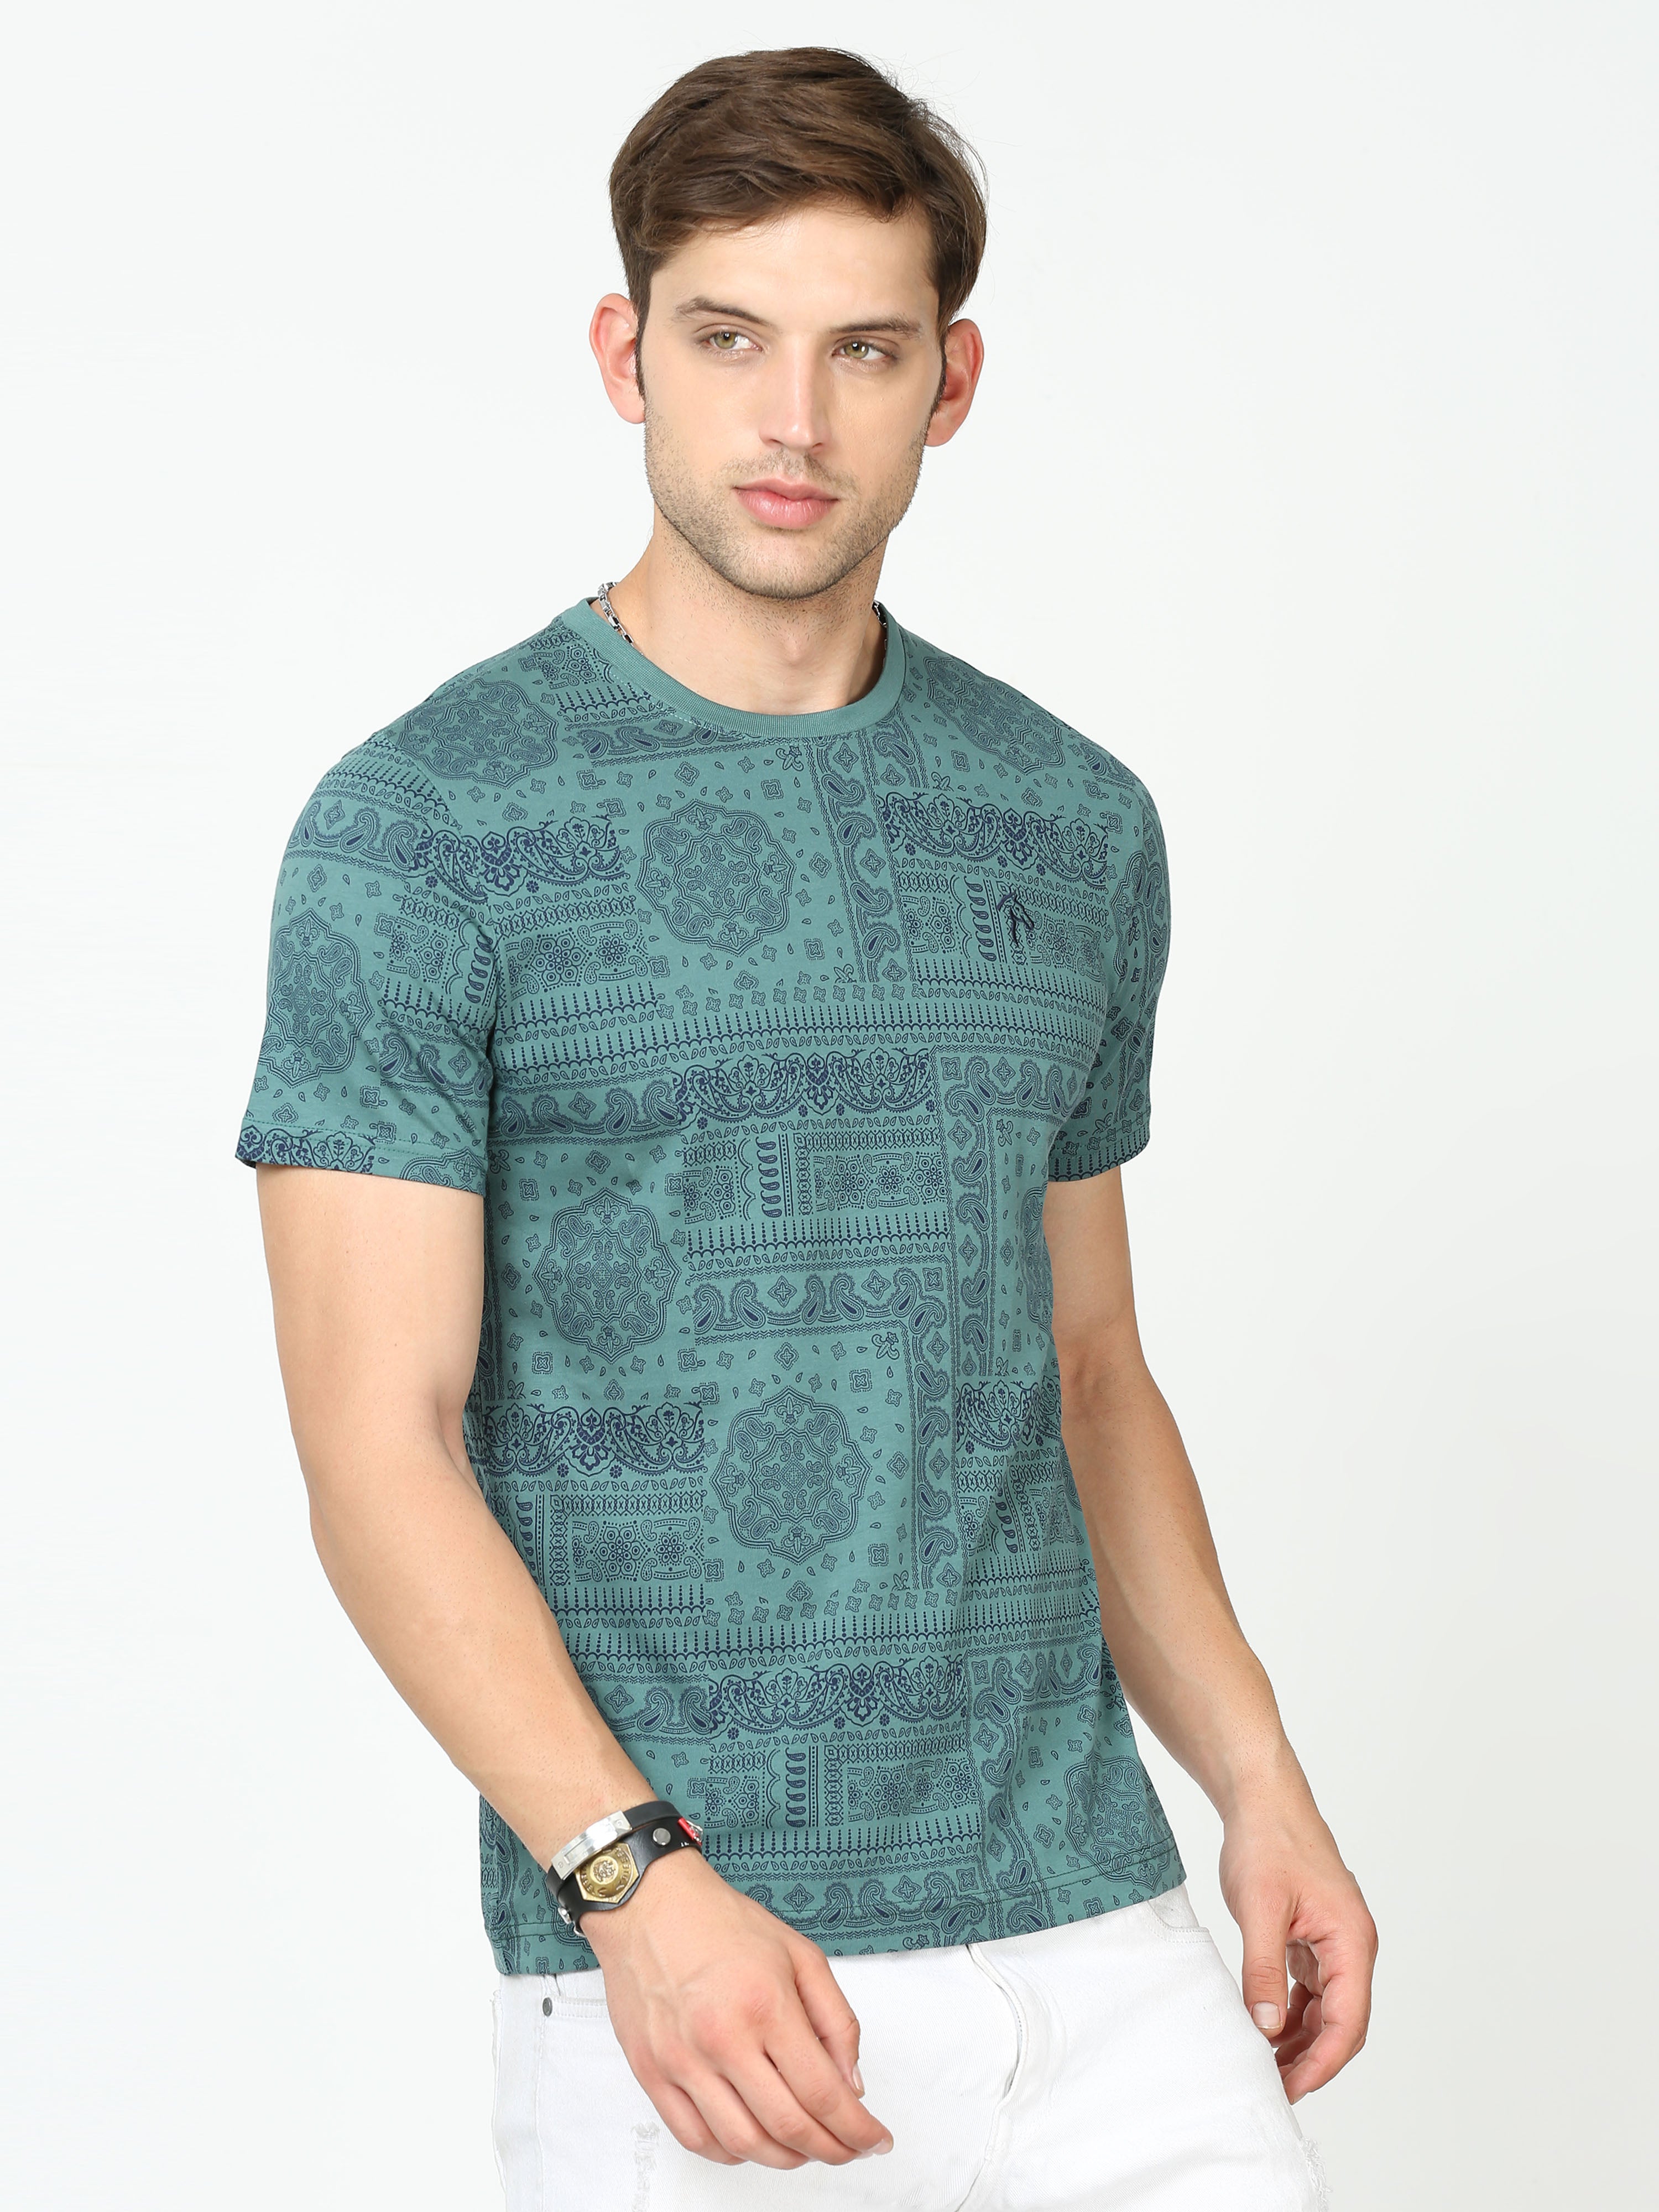 Classic Polo Mens Cotton Half Sleeves Floral Slim Fit Crew Neck Green Color T-Shirt | Brcn - 554 B Sf C